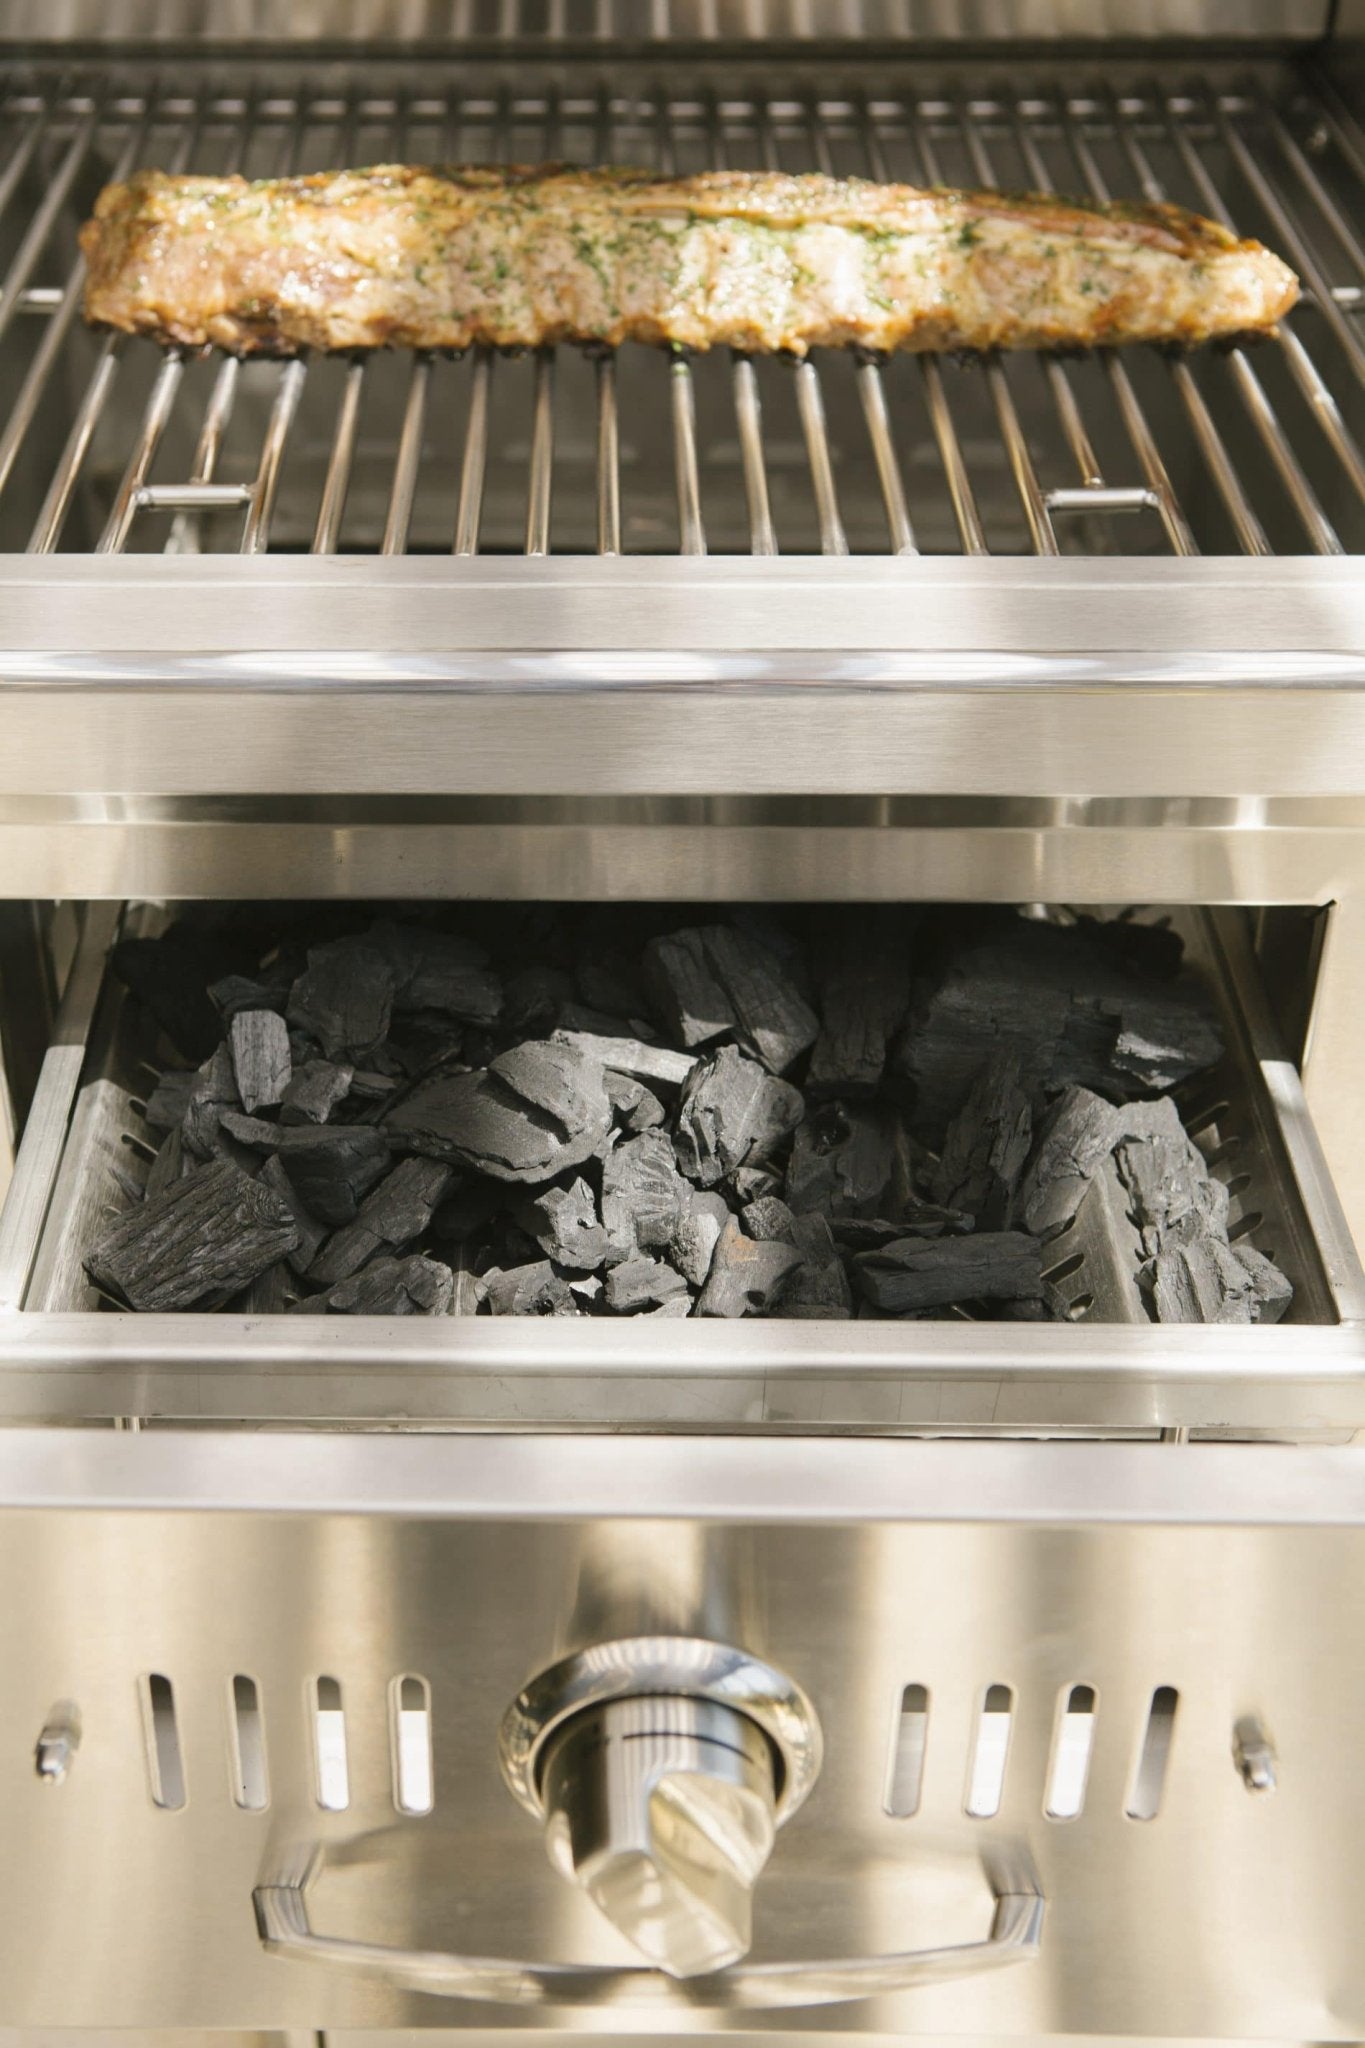 Coyote 36 Inch Built-In Charcoal Grill - C1CH36